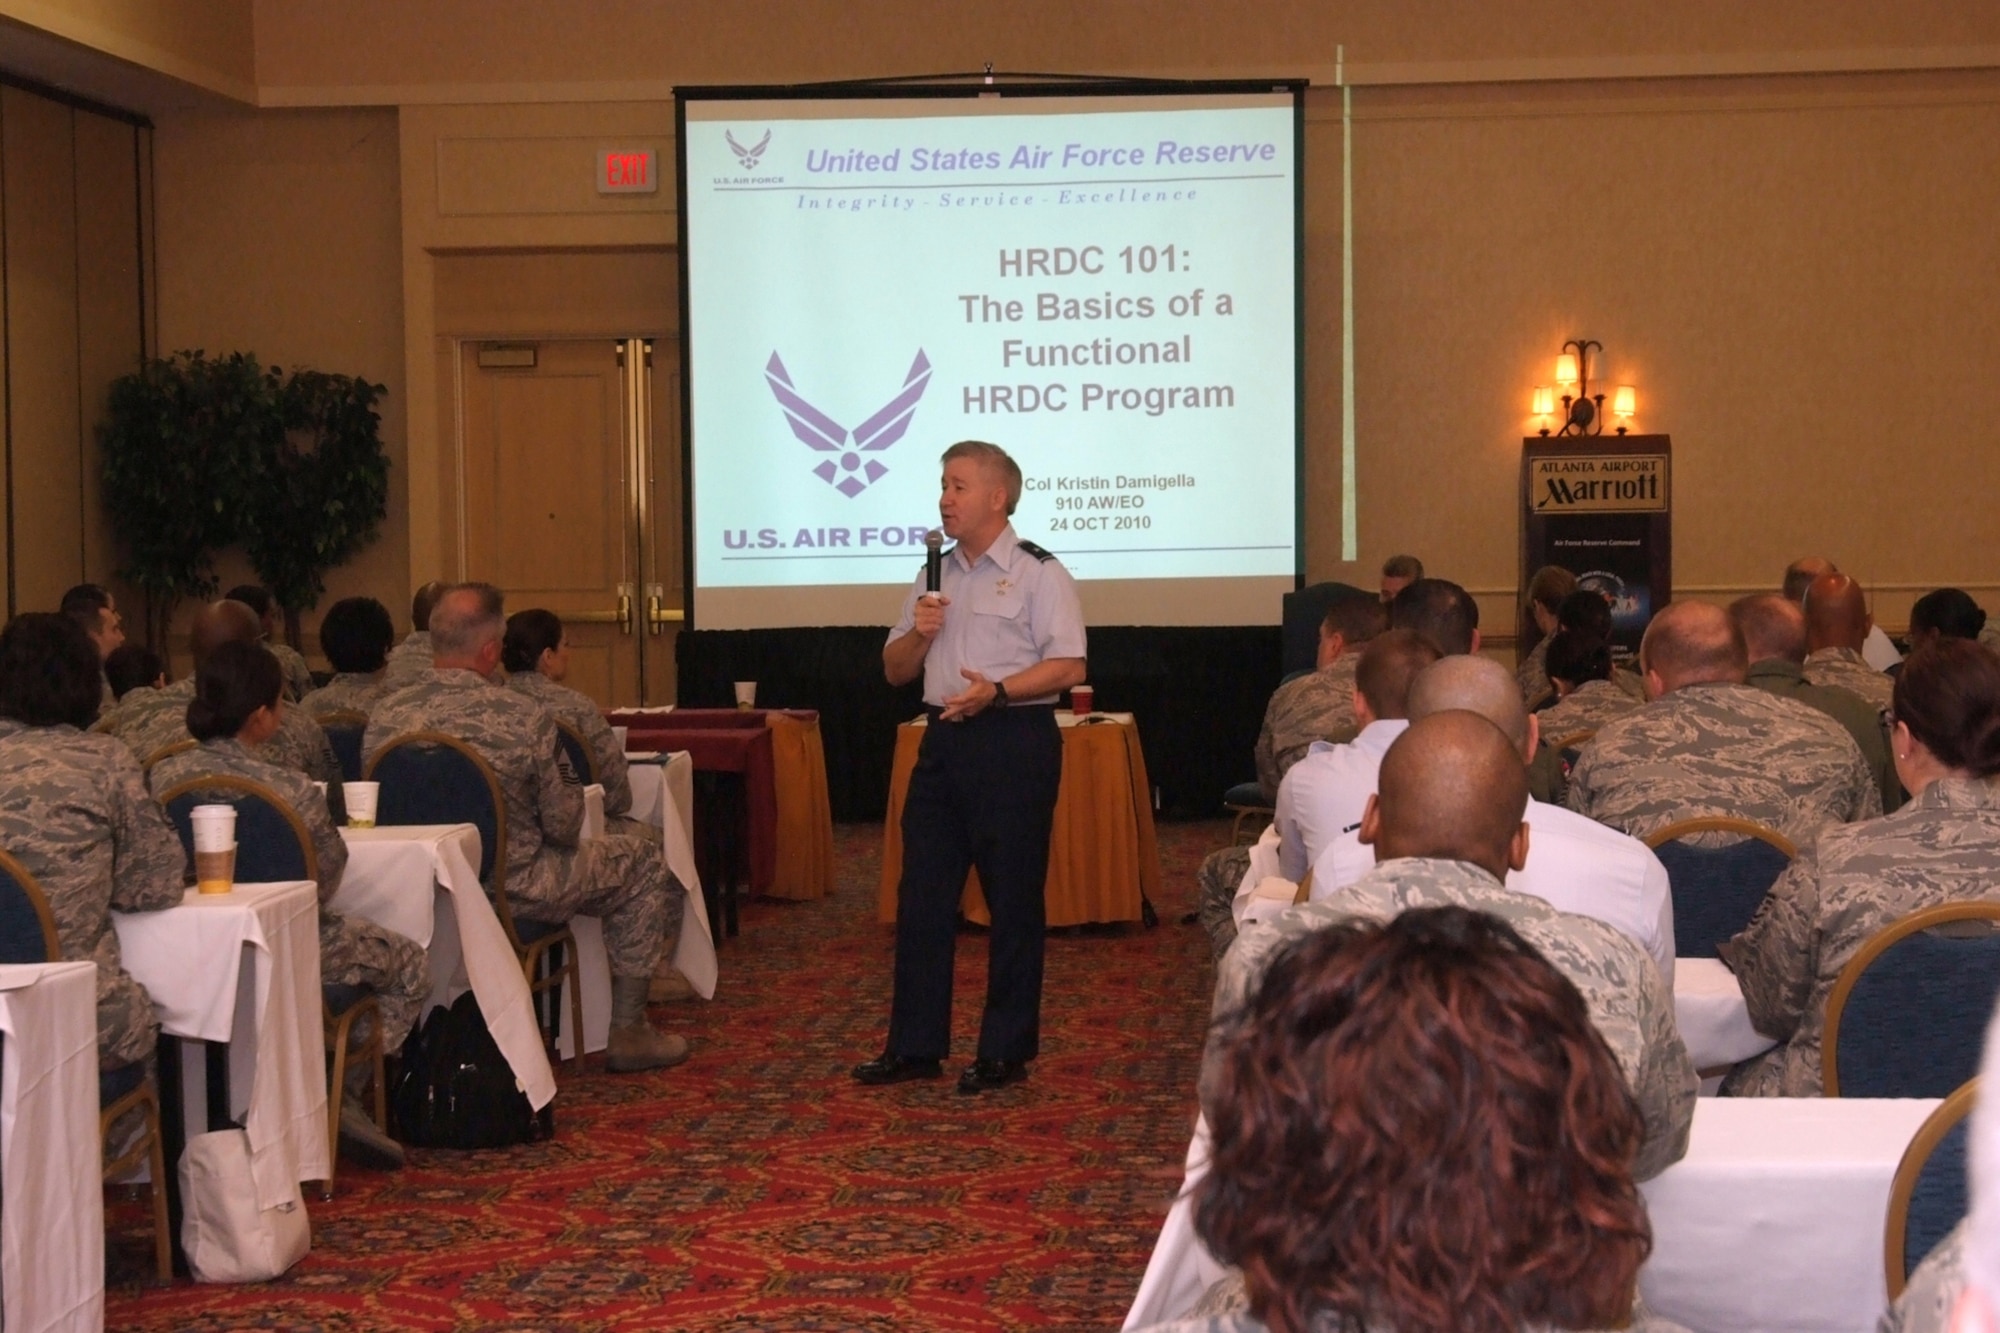 Brig. Gen. Keith Kries, from 8th Air Force at Barksdale Air Force Base, La., addresses the crowd during the Air Force Reserve Command Human Resources Development Council conference  Oct 24-27, 2010 in Atlanta.  The goal of HRDC is to create and maintain a fully developed, skilled, motivated, enthusiastic, and diverse workforce. (U.S. Air Force photo/Tech Sgt.l Sergeant Joe Zuccaro)